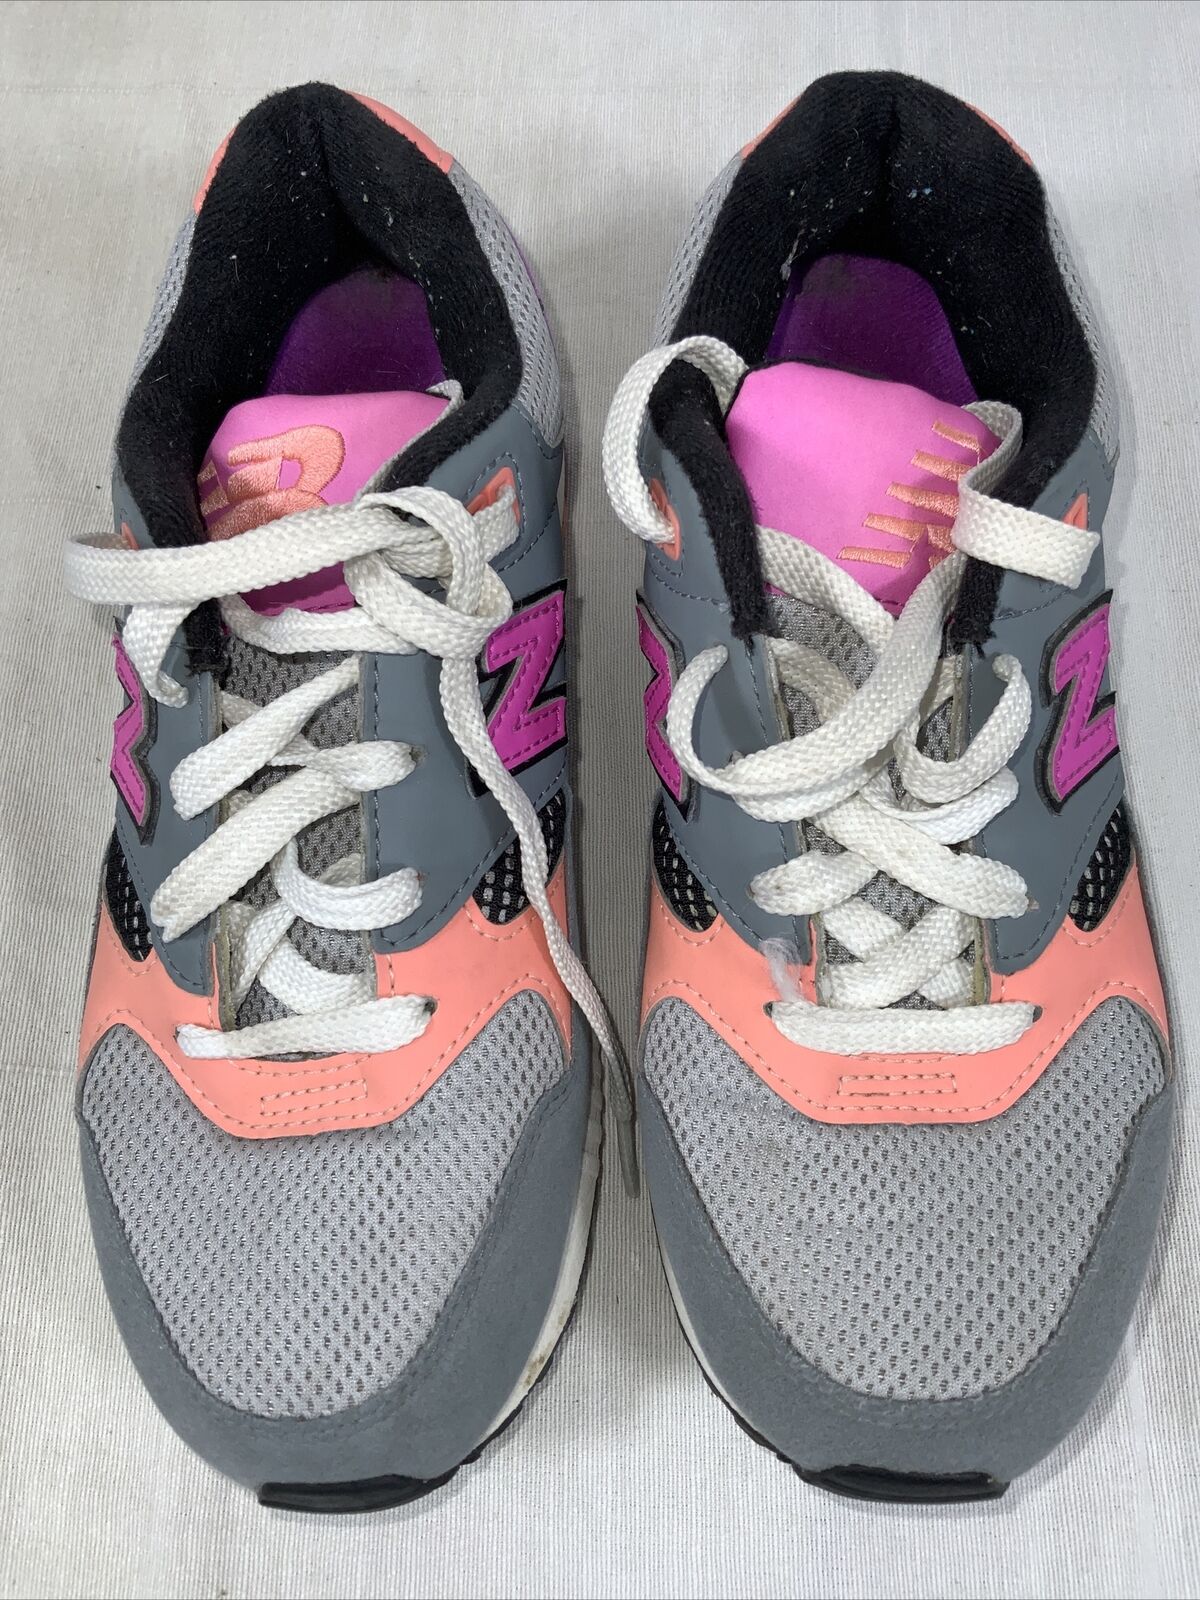 NEW 530 90s Running LIFESTYLE SHOES GREY PINK WOMENS 6.5 eBay